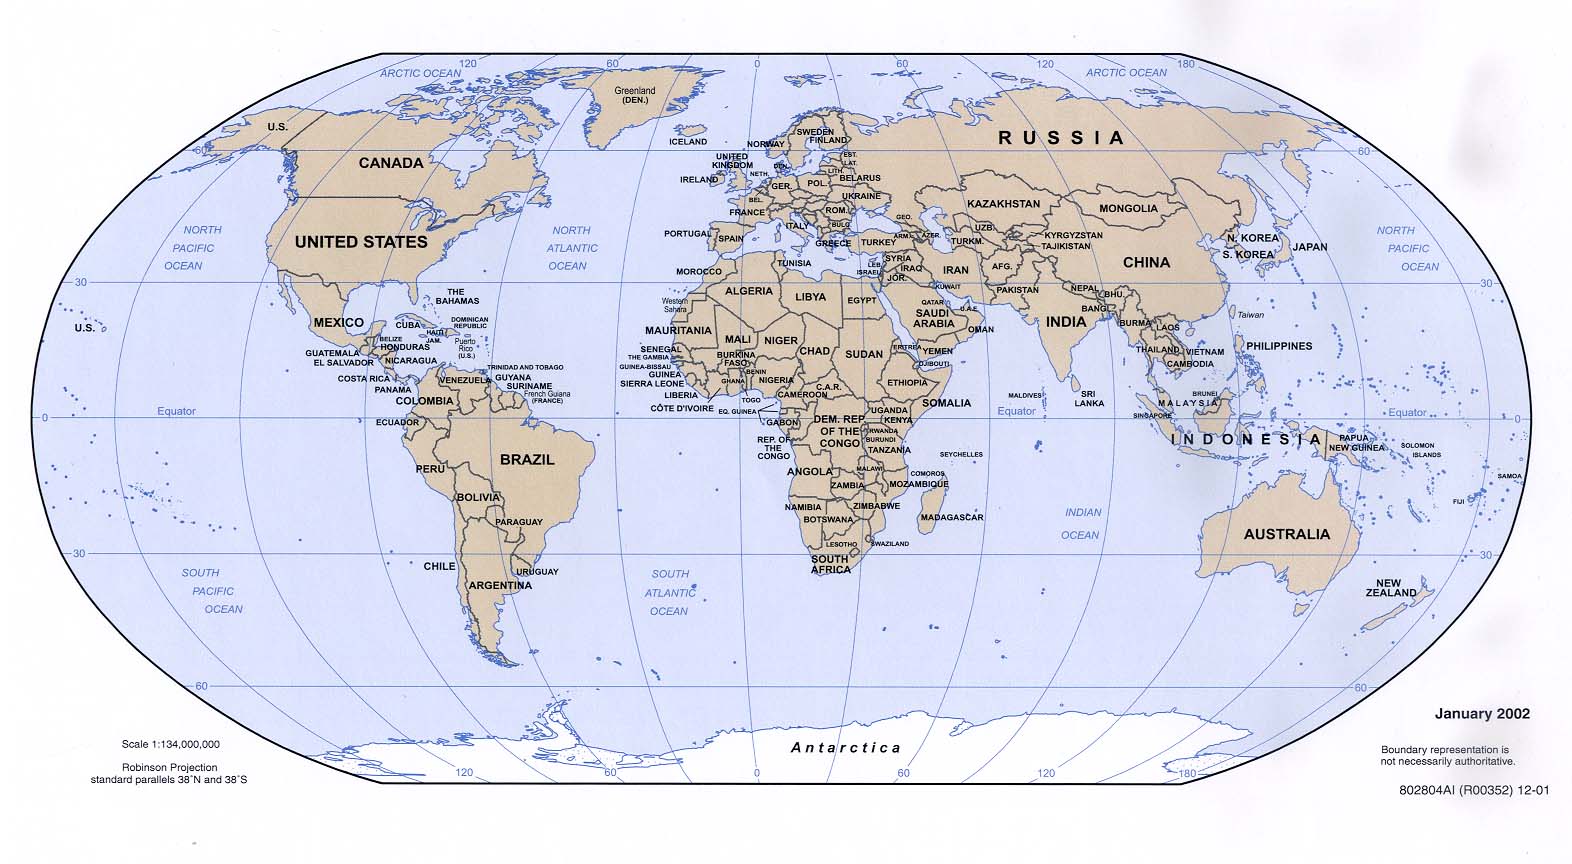 world maps free online - World Maps - Map Pictures